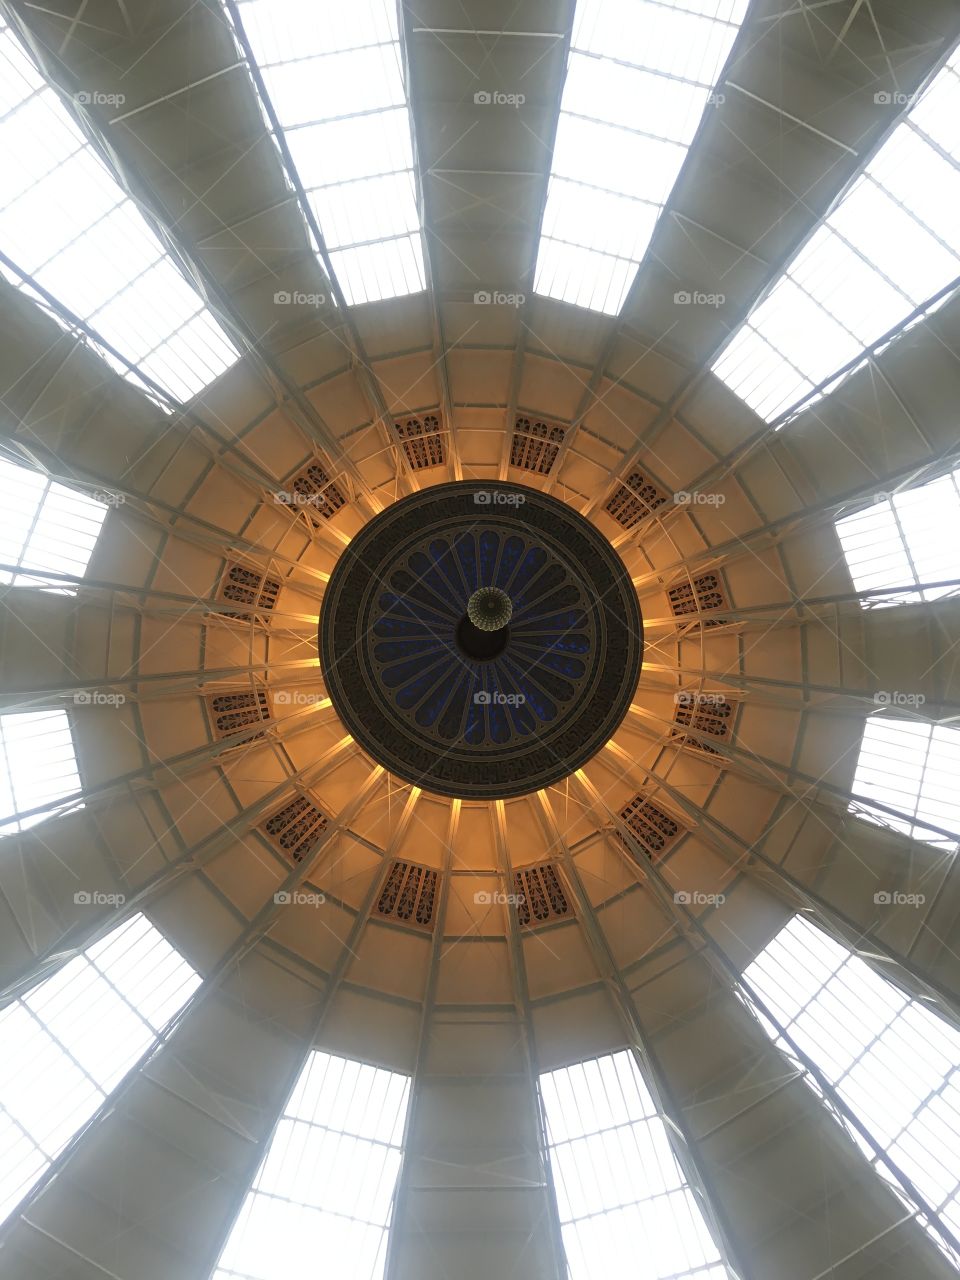 Dome above